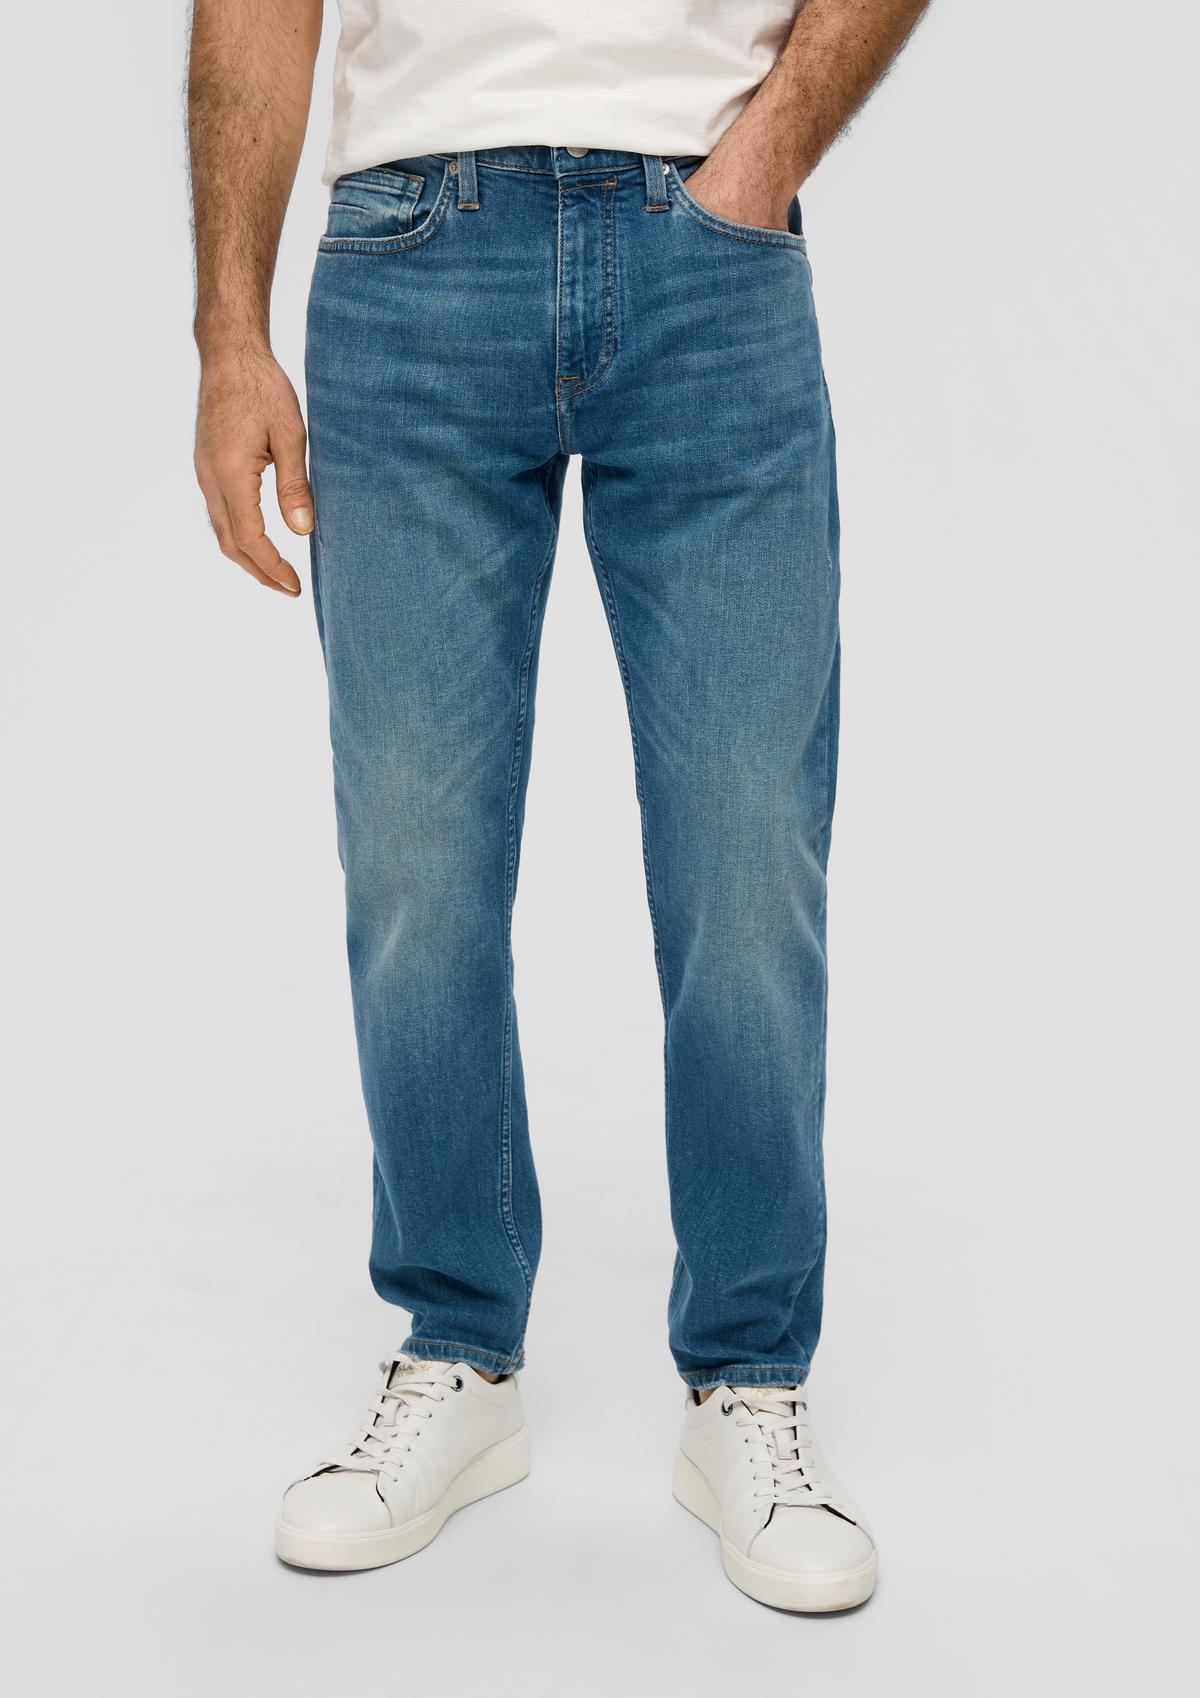 s.Oliver Mauro jeans / regular fit / high-waisted / tapered leg